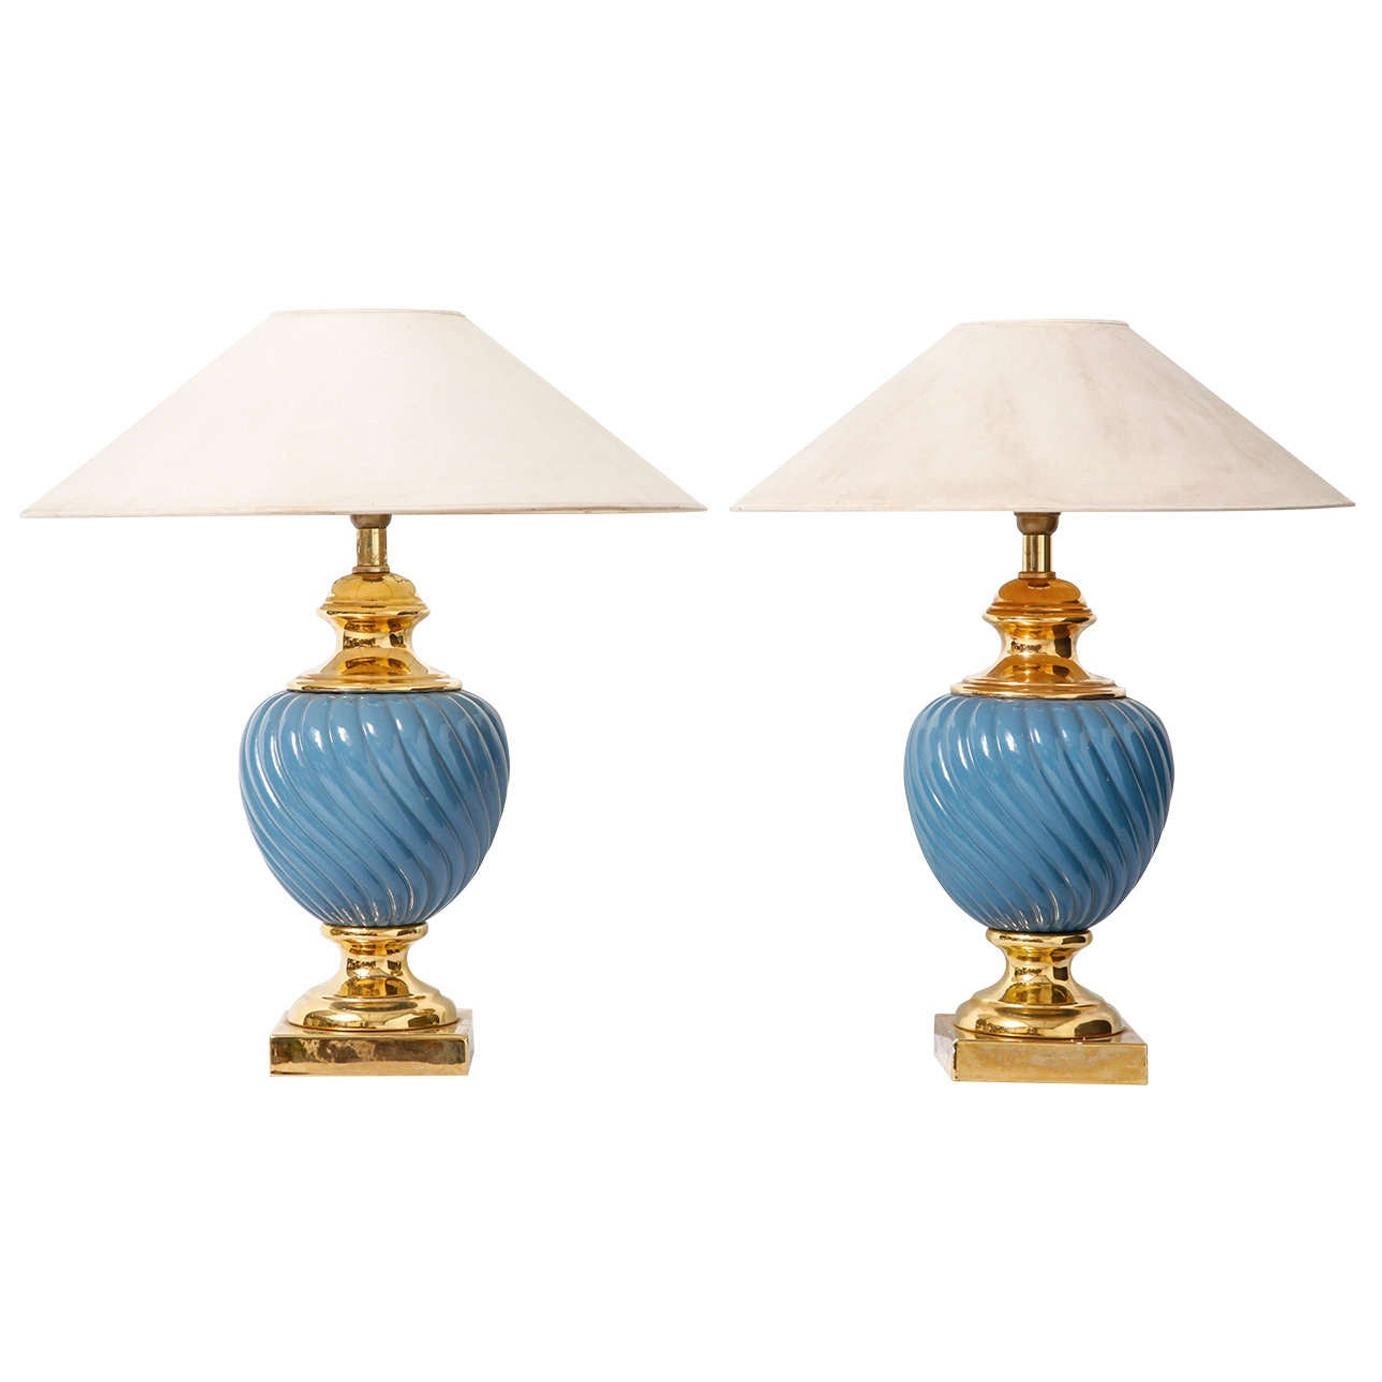 Set of Blue and Gold Ceramic Table Lamps, Hollywood Regency, 1970s